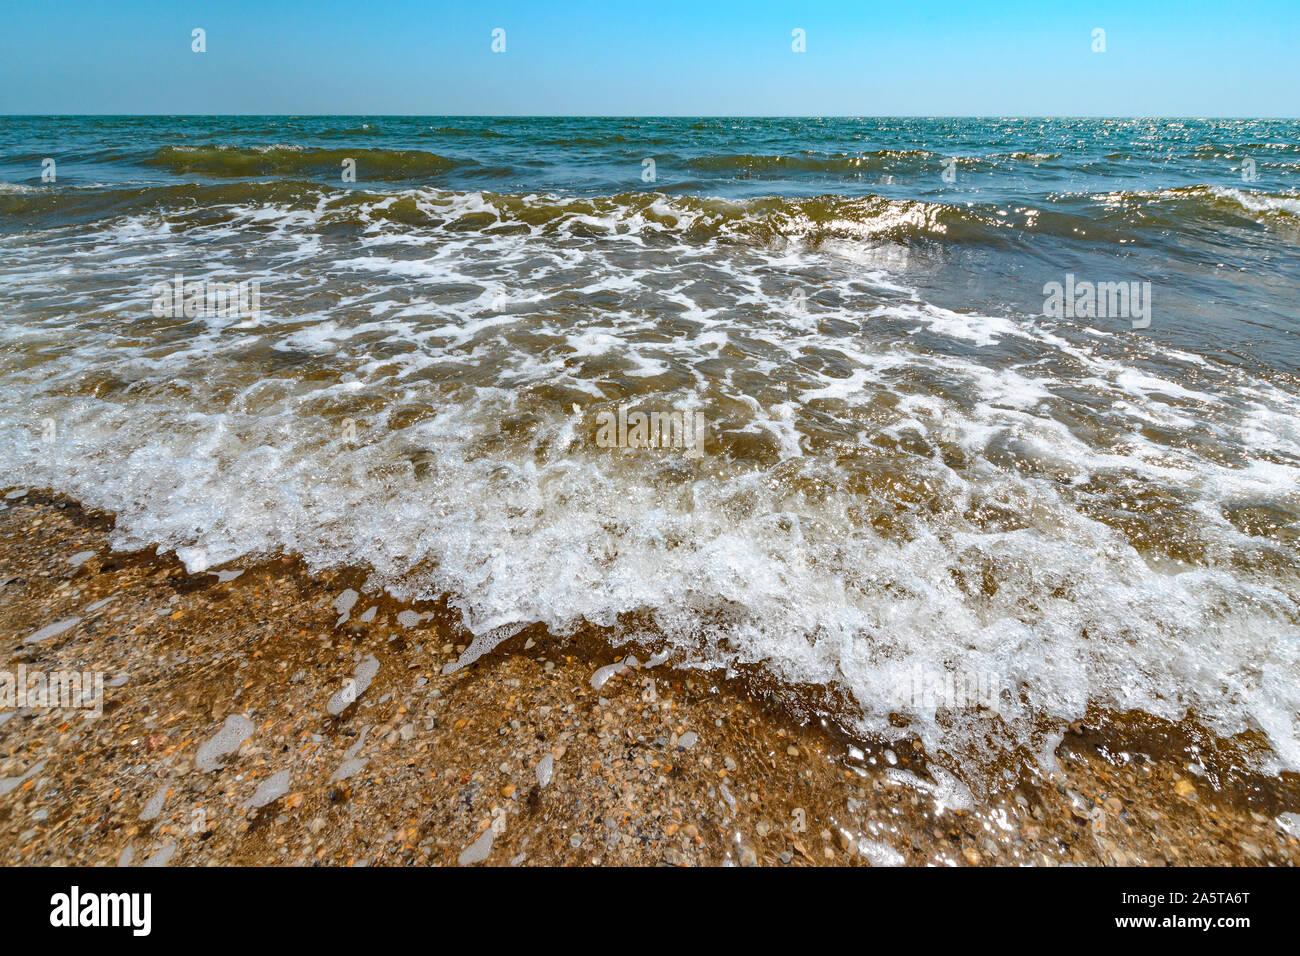 Sea view from tropical beach with sunny sky. Stock Photo